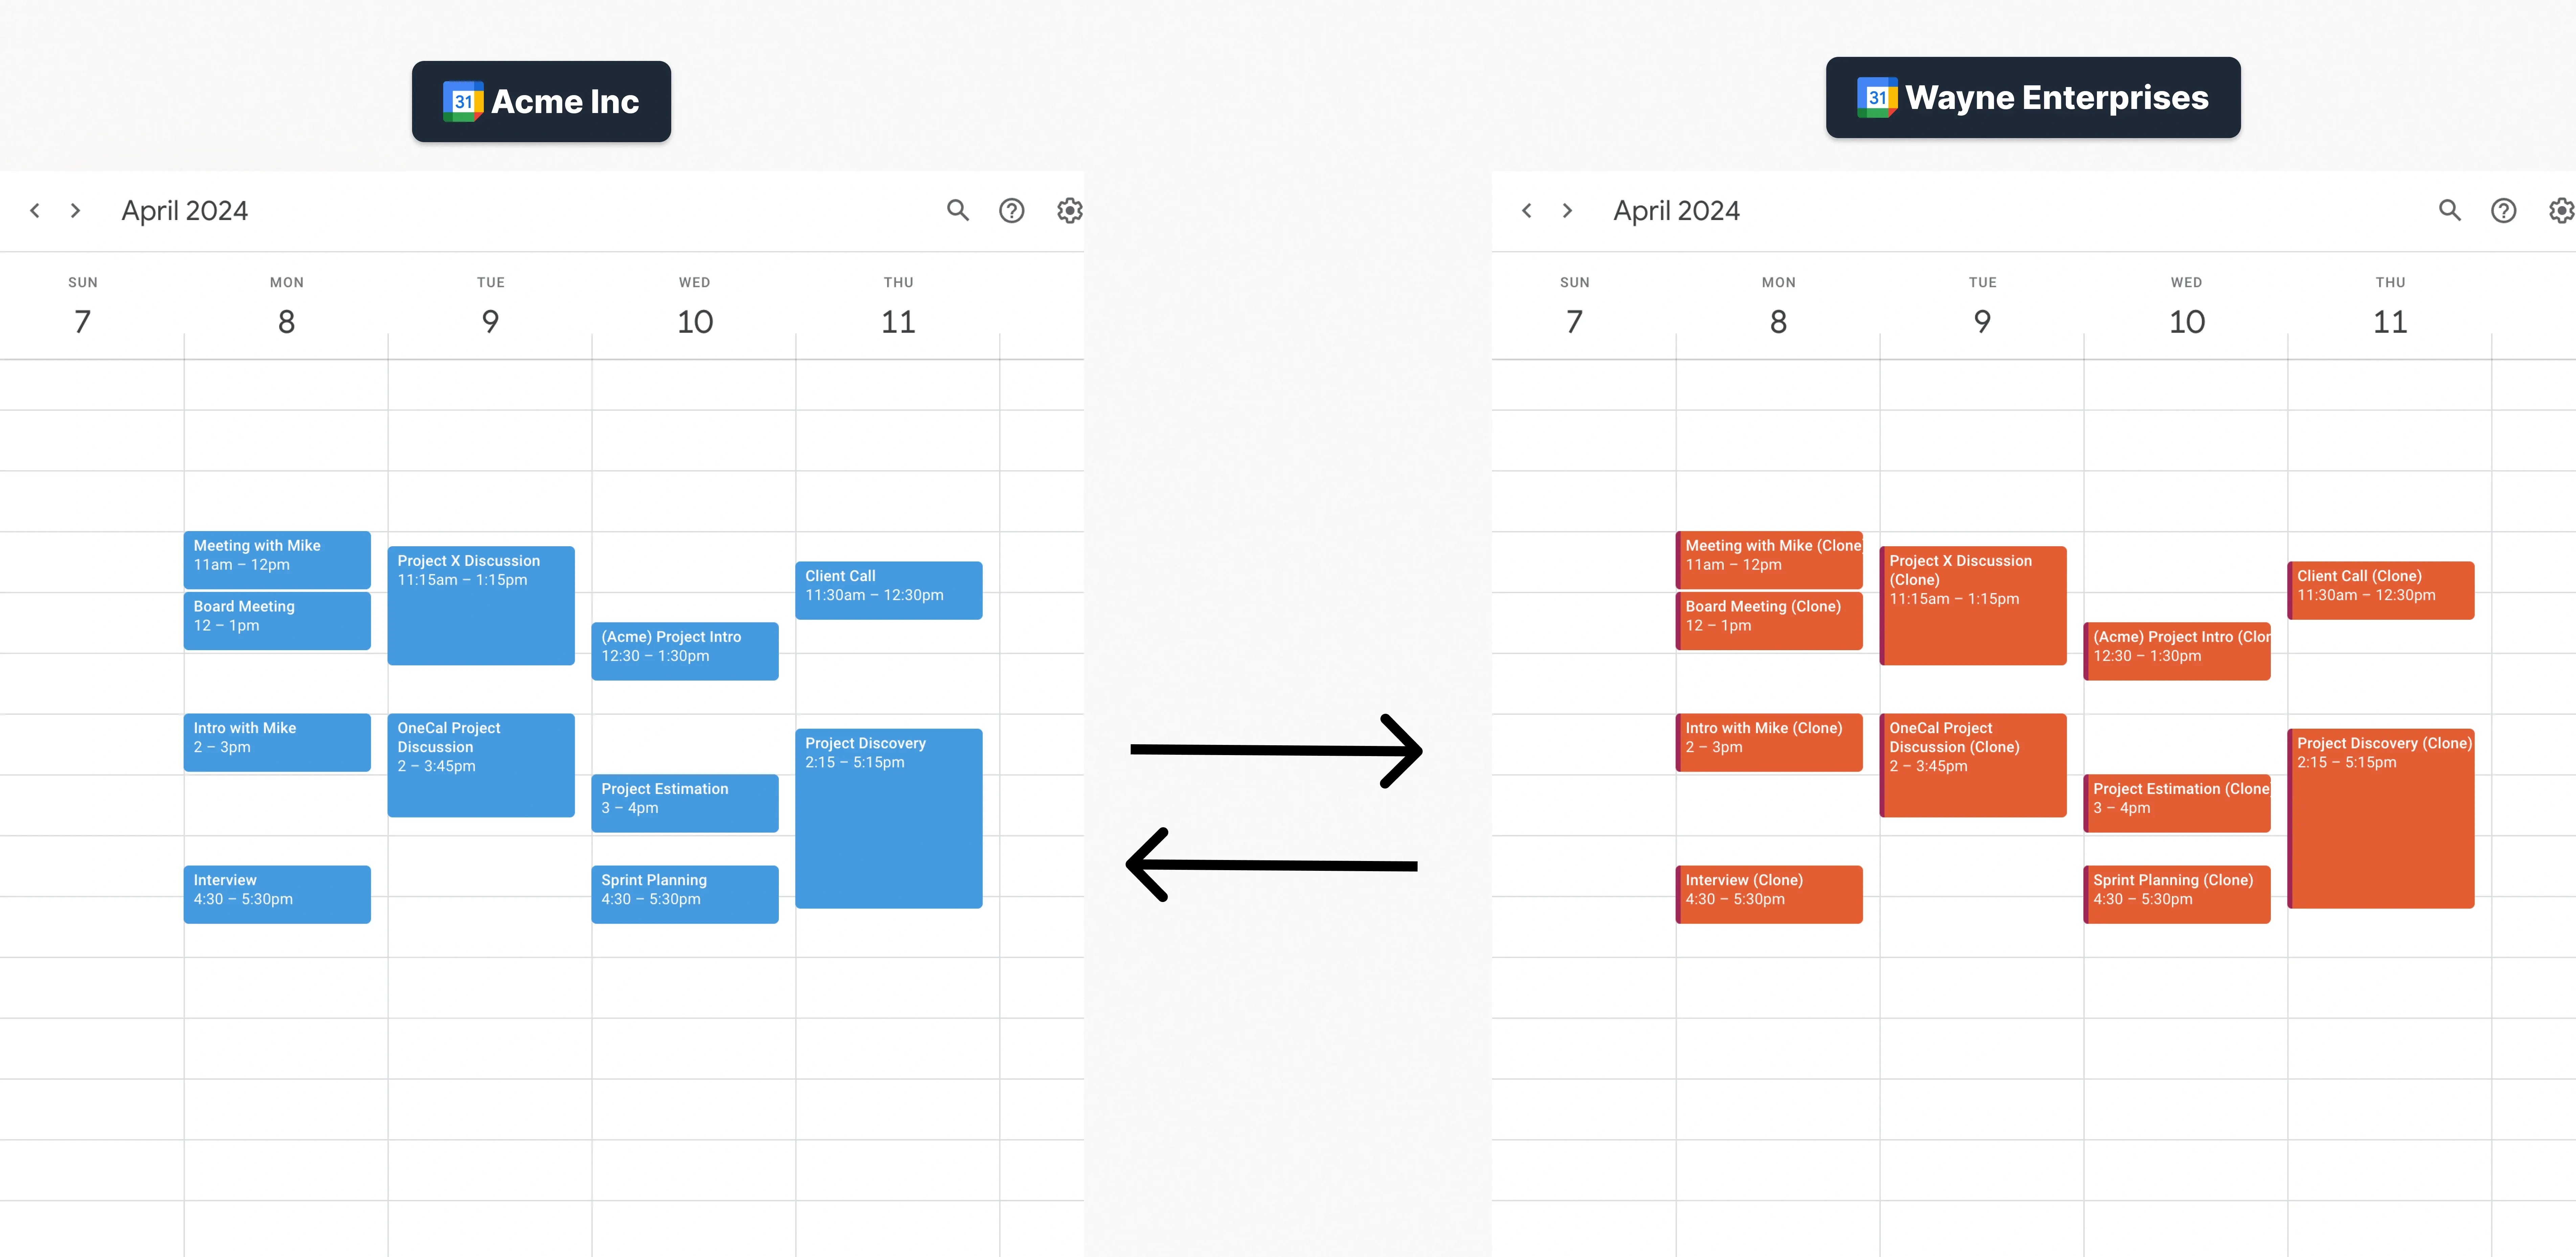 Example of synced conference room calendars between organizations